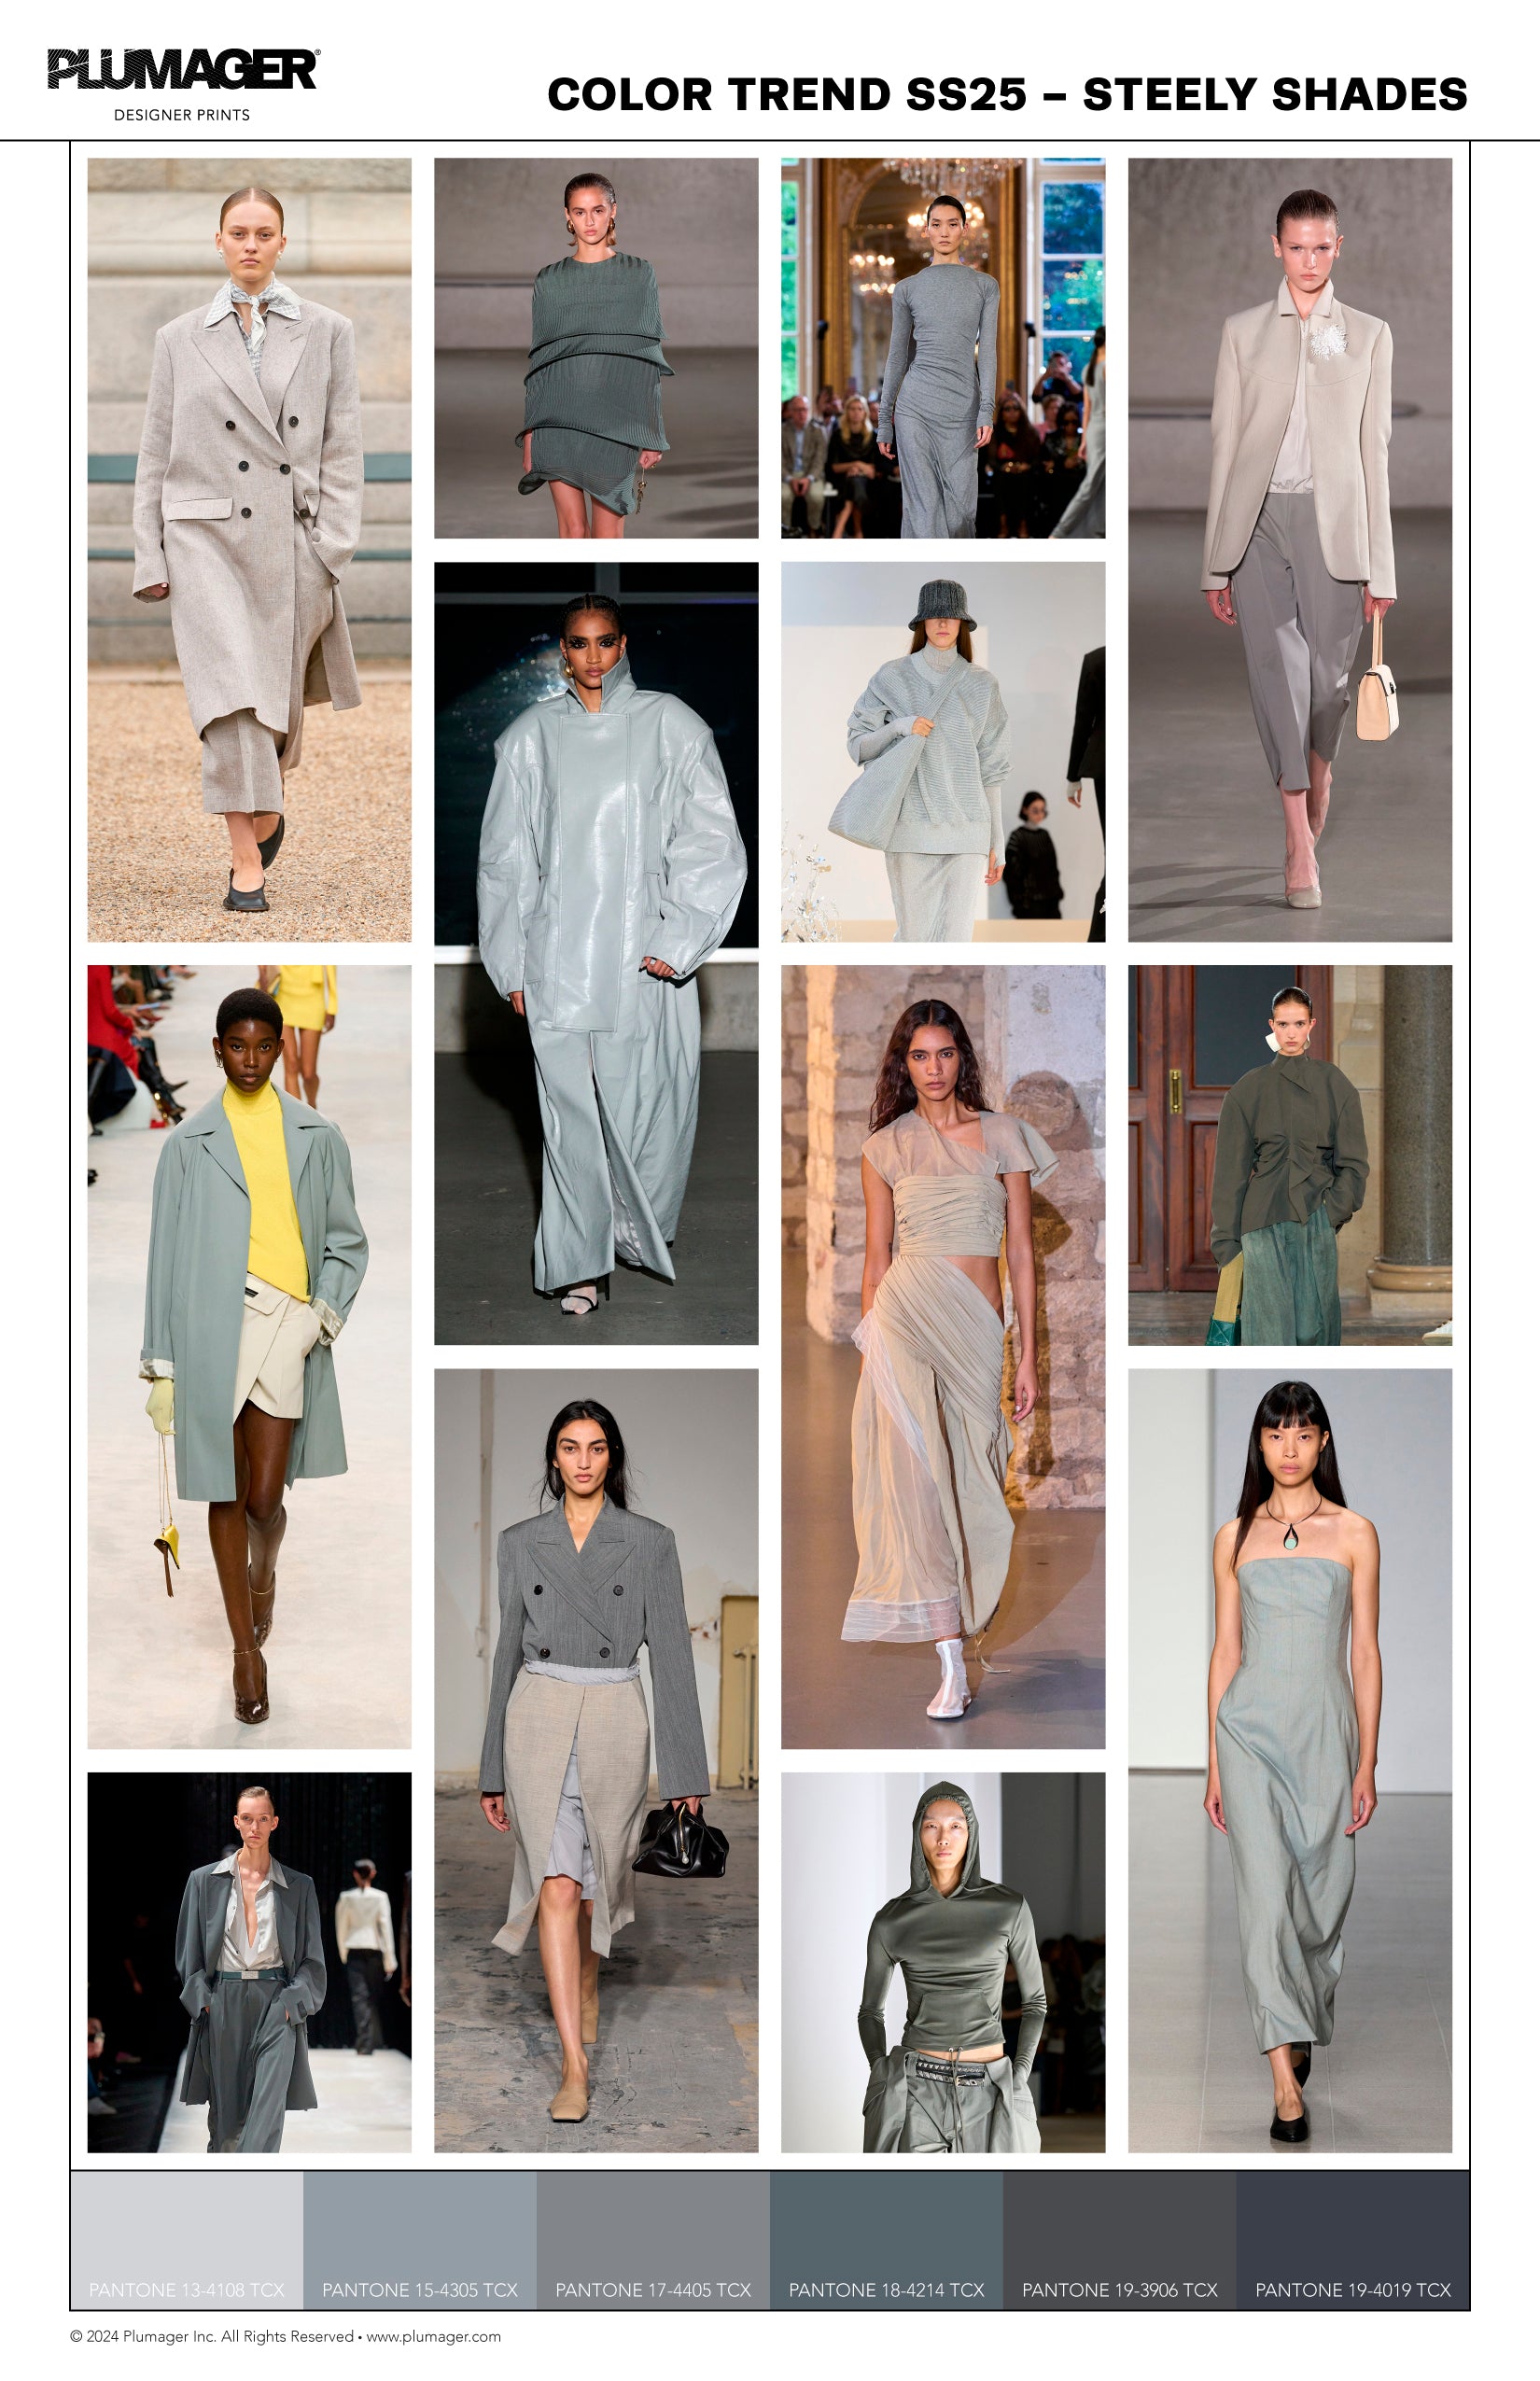 SS25 Print Textile Color Trend Report - Steely Shades